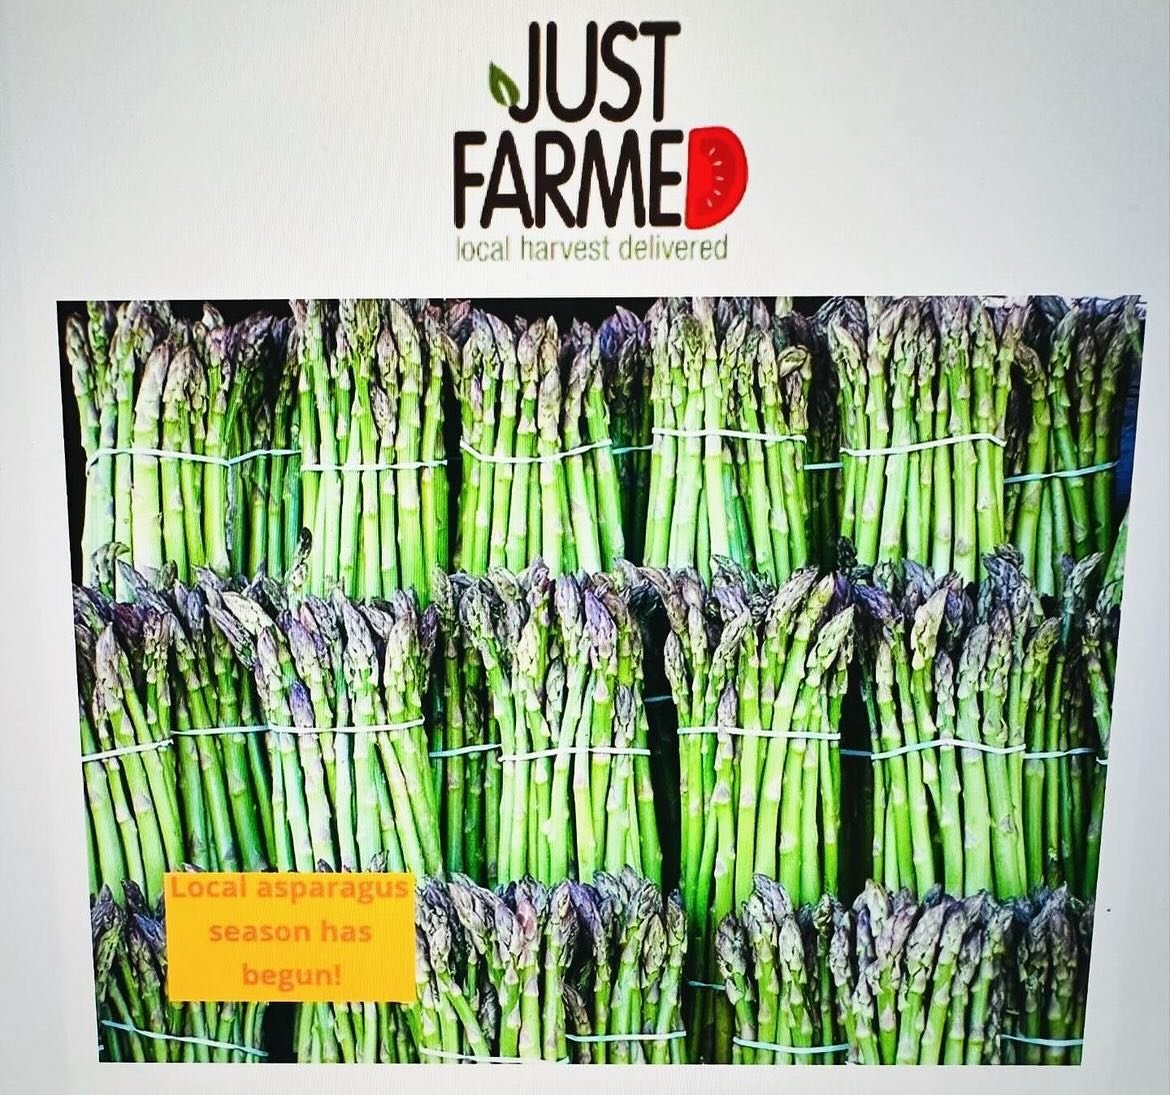 Our tried and true partners at @justfarmed are kicking off the season with #asparagus and we are excited to offer #peakseason @sheppardfarmsnj best.